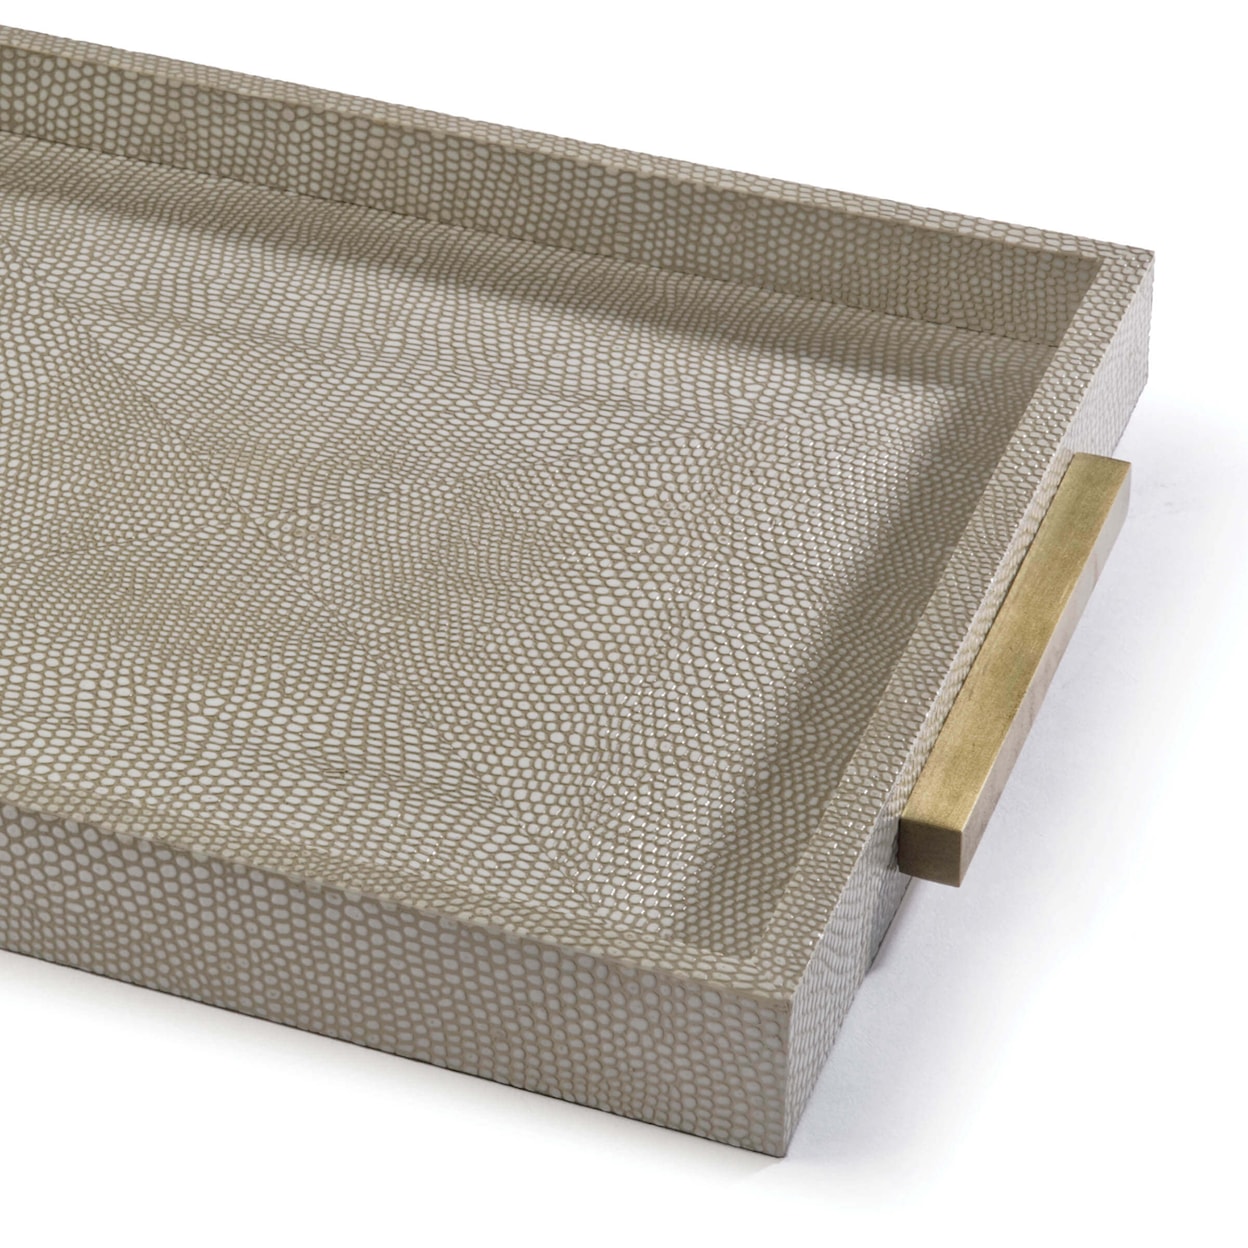 Regina-Andrew Design Regina-Andrew Design Square Shagreen Boutique Tray